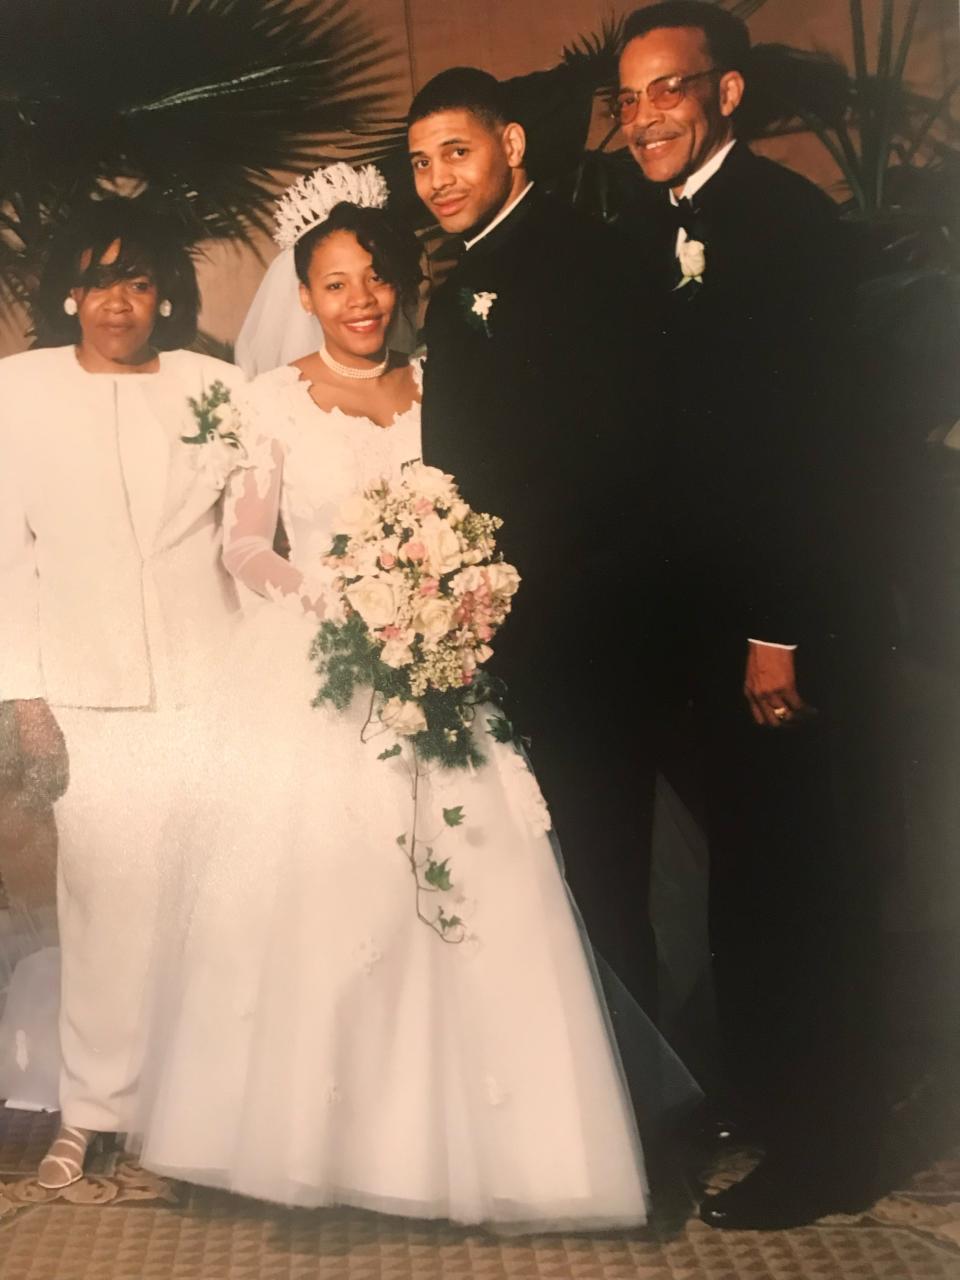 Lieutenant Gov. Tahesha Way on her wedding day in Philadelphia in March 1997 when she married Charles Way, with her parents, Rosa and Robert Wright, on either side.